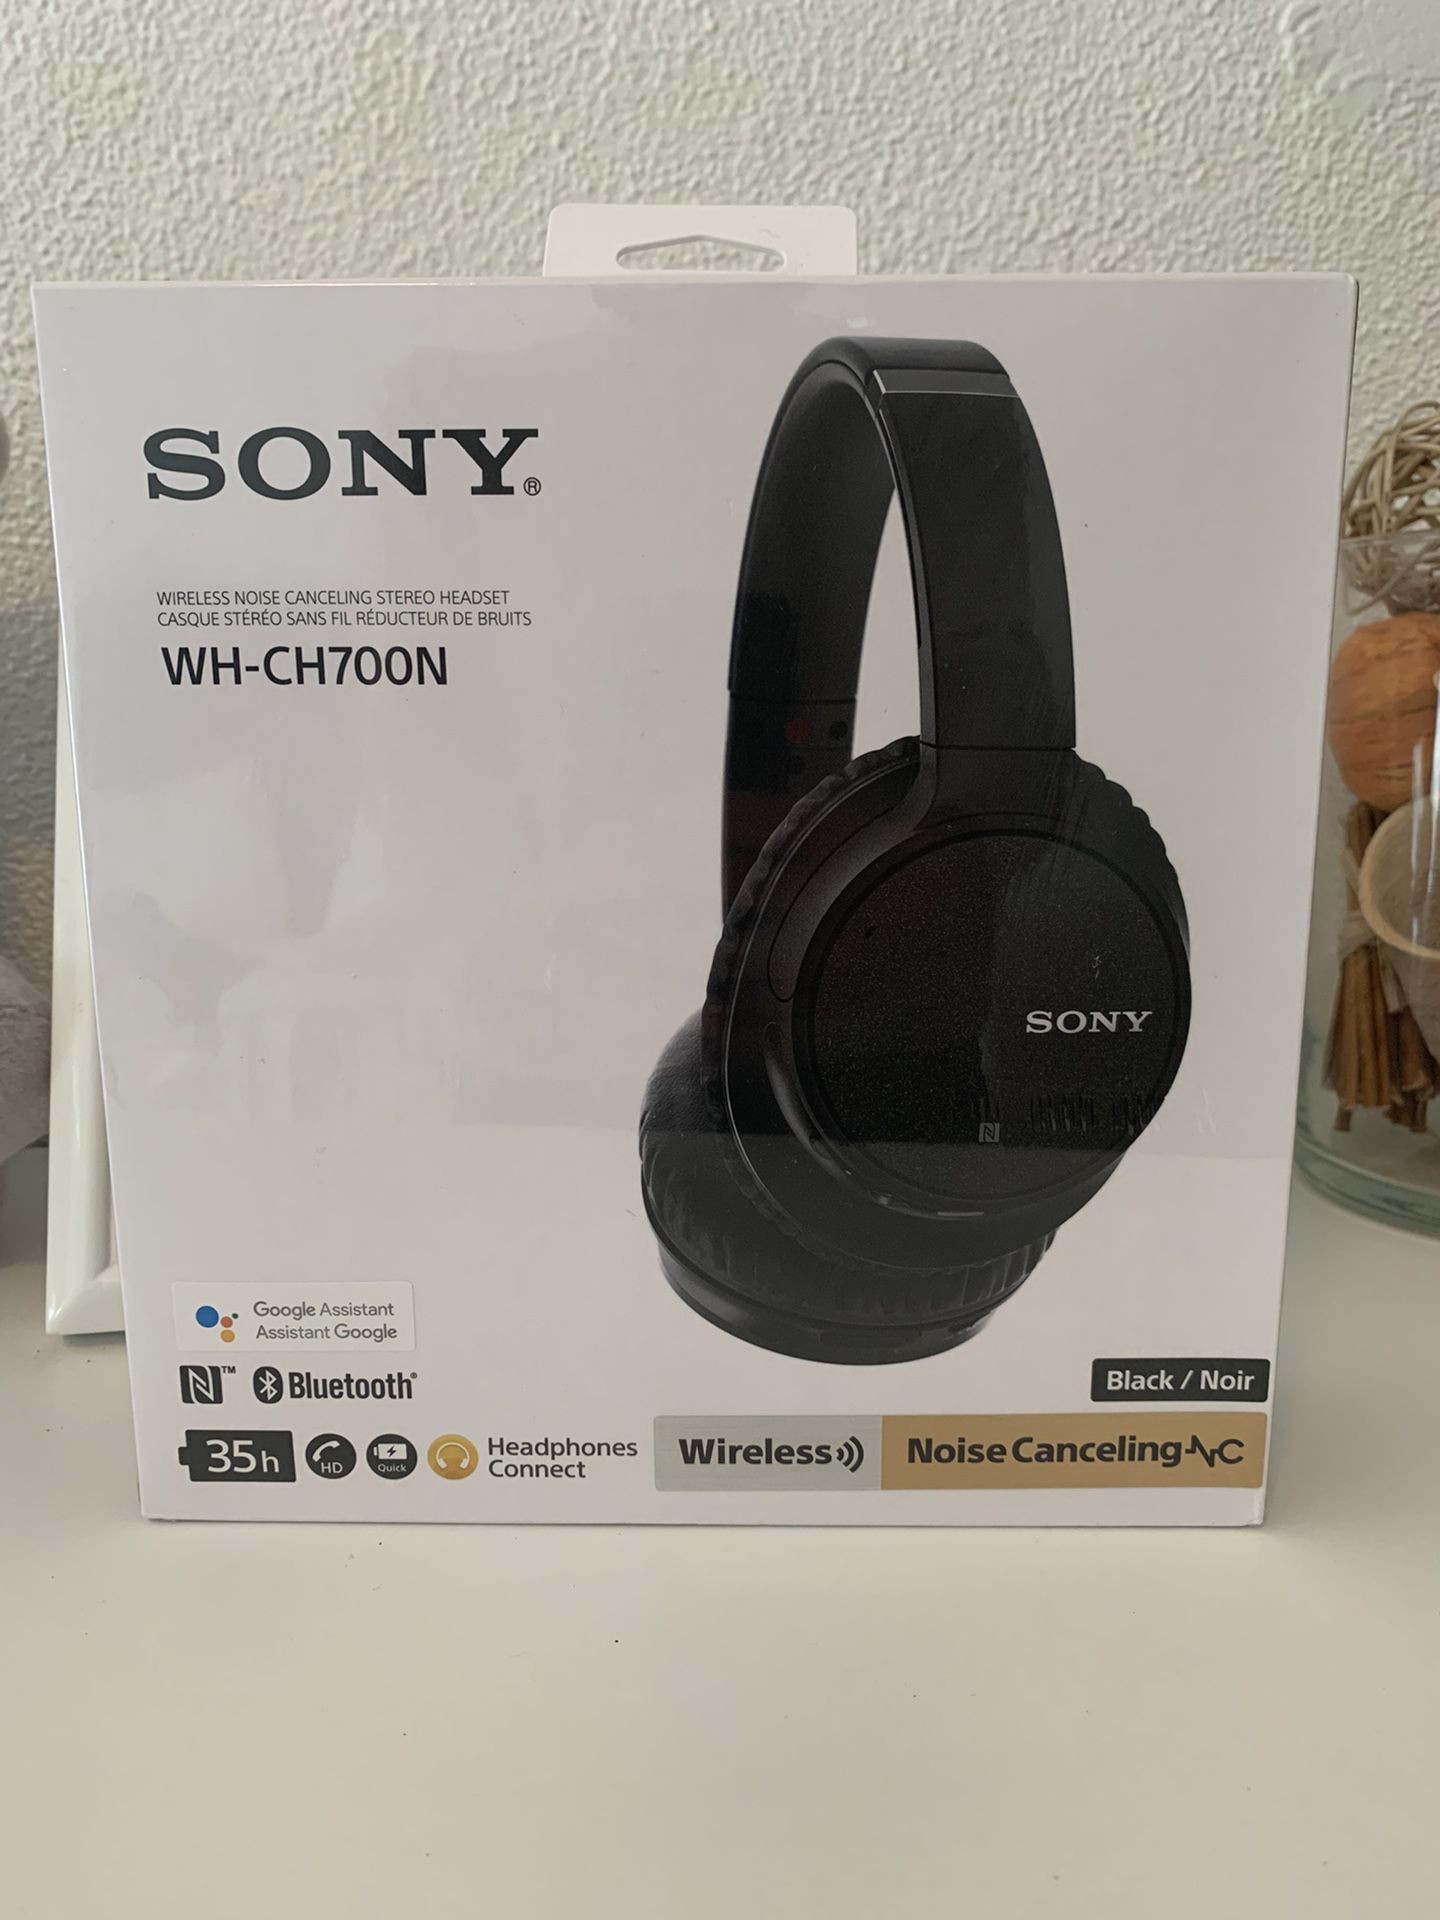 Sony WH-CH700N Wireless Noise-Canceling Headphones BLACK - Sealed NEW